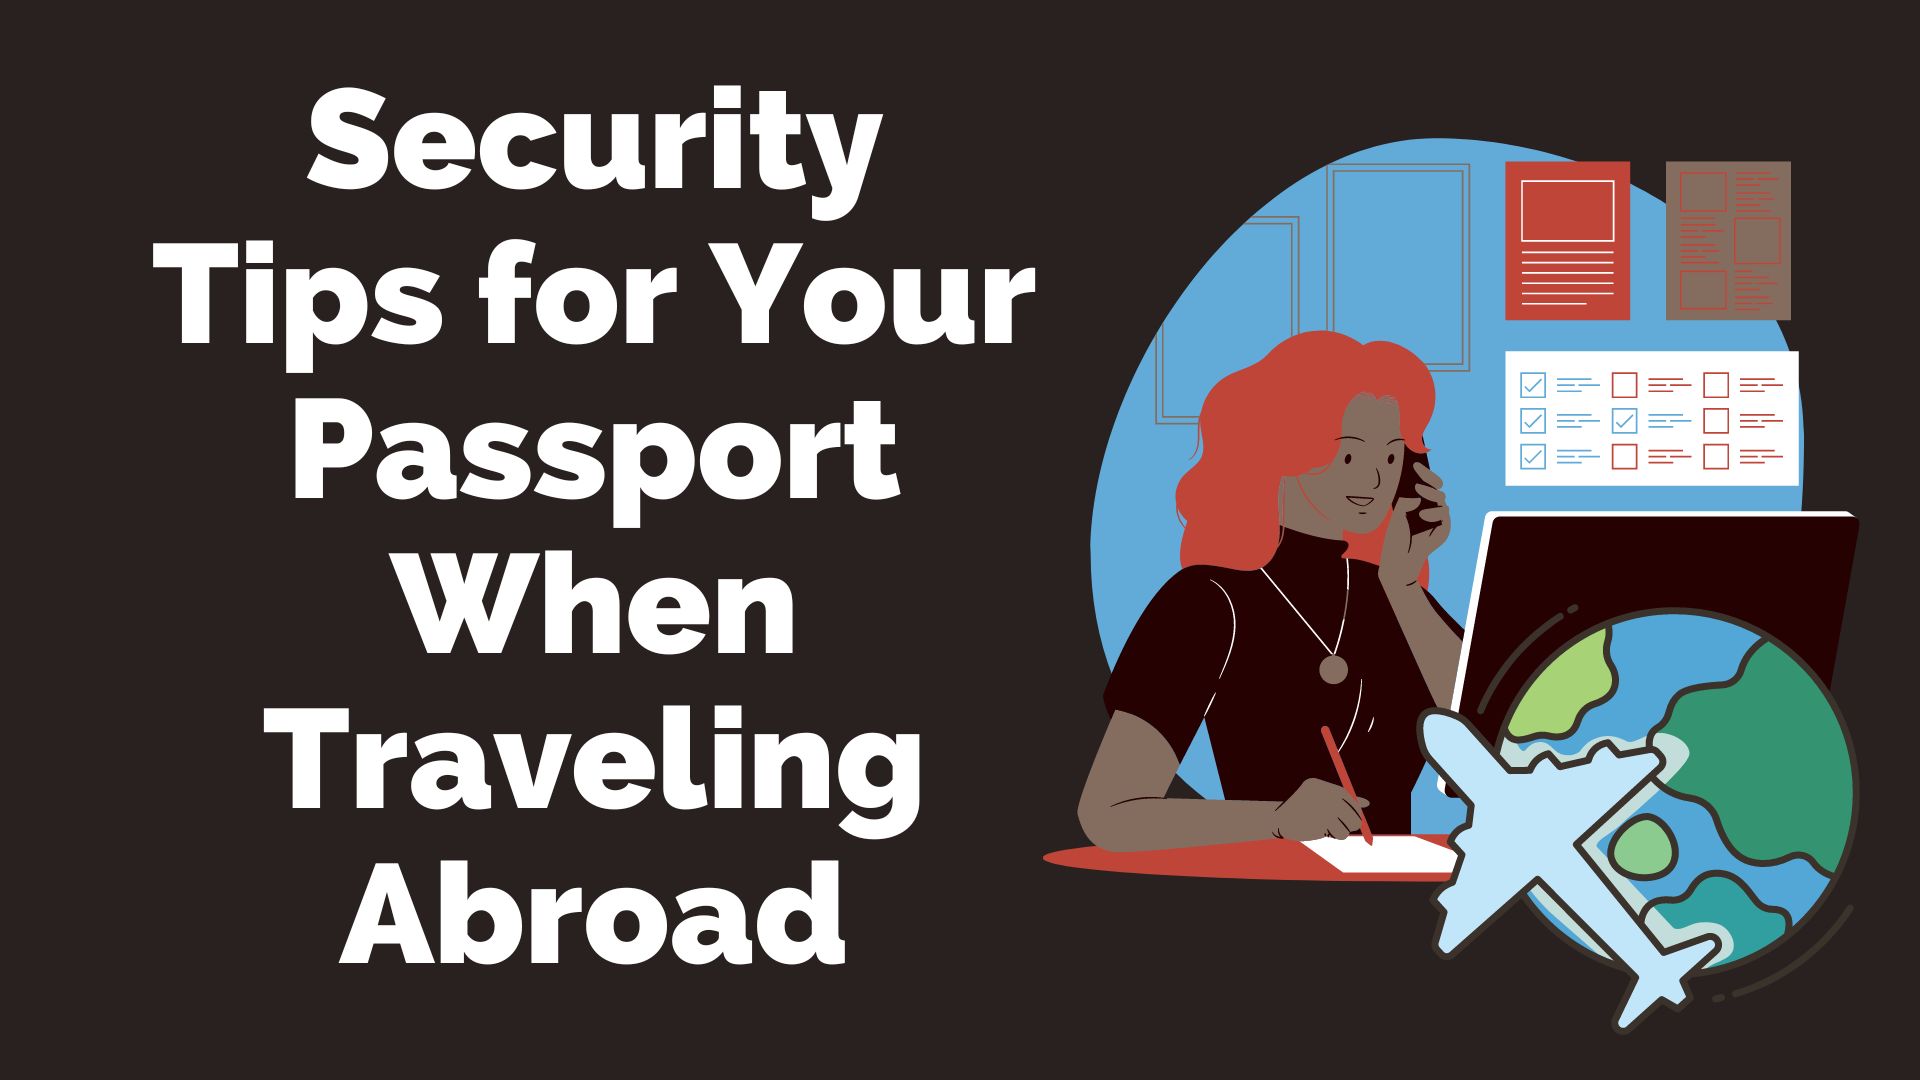 Security Tips for Your Passport When Traveling Abroad